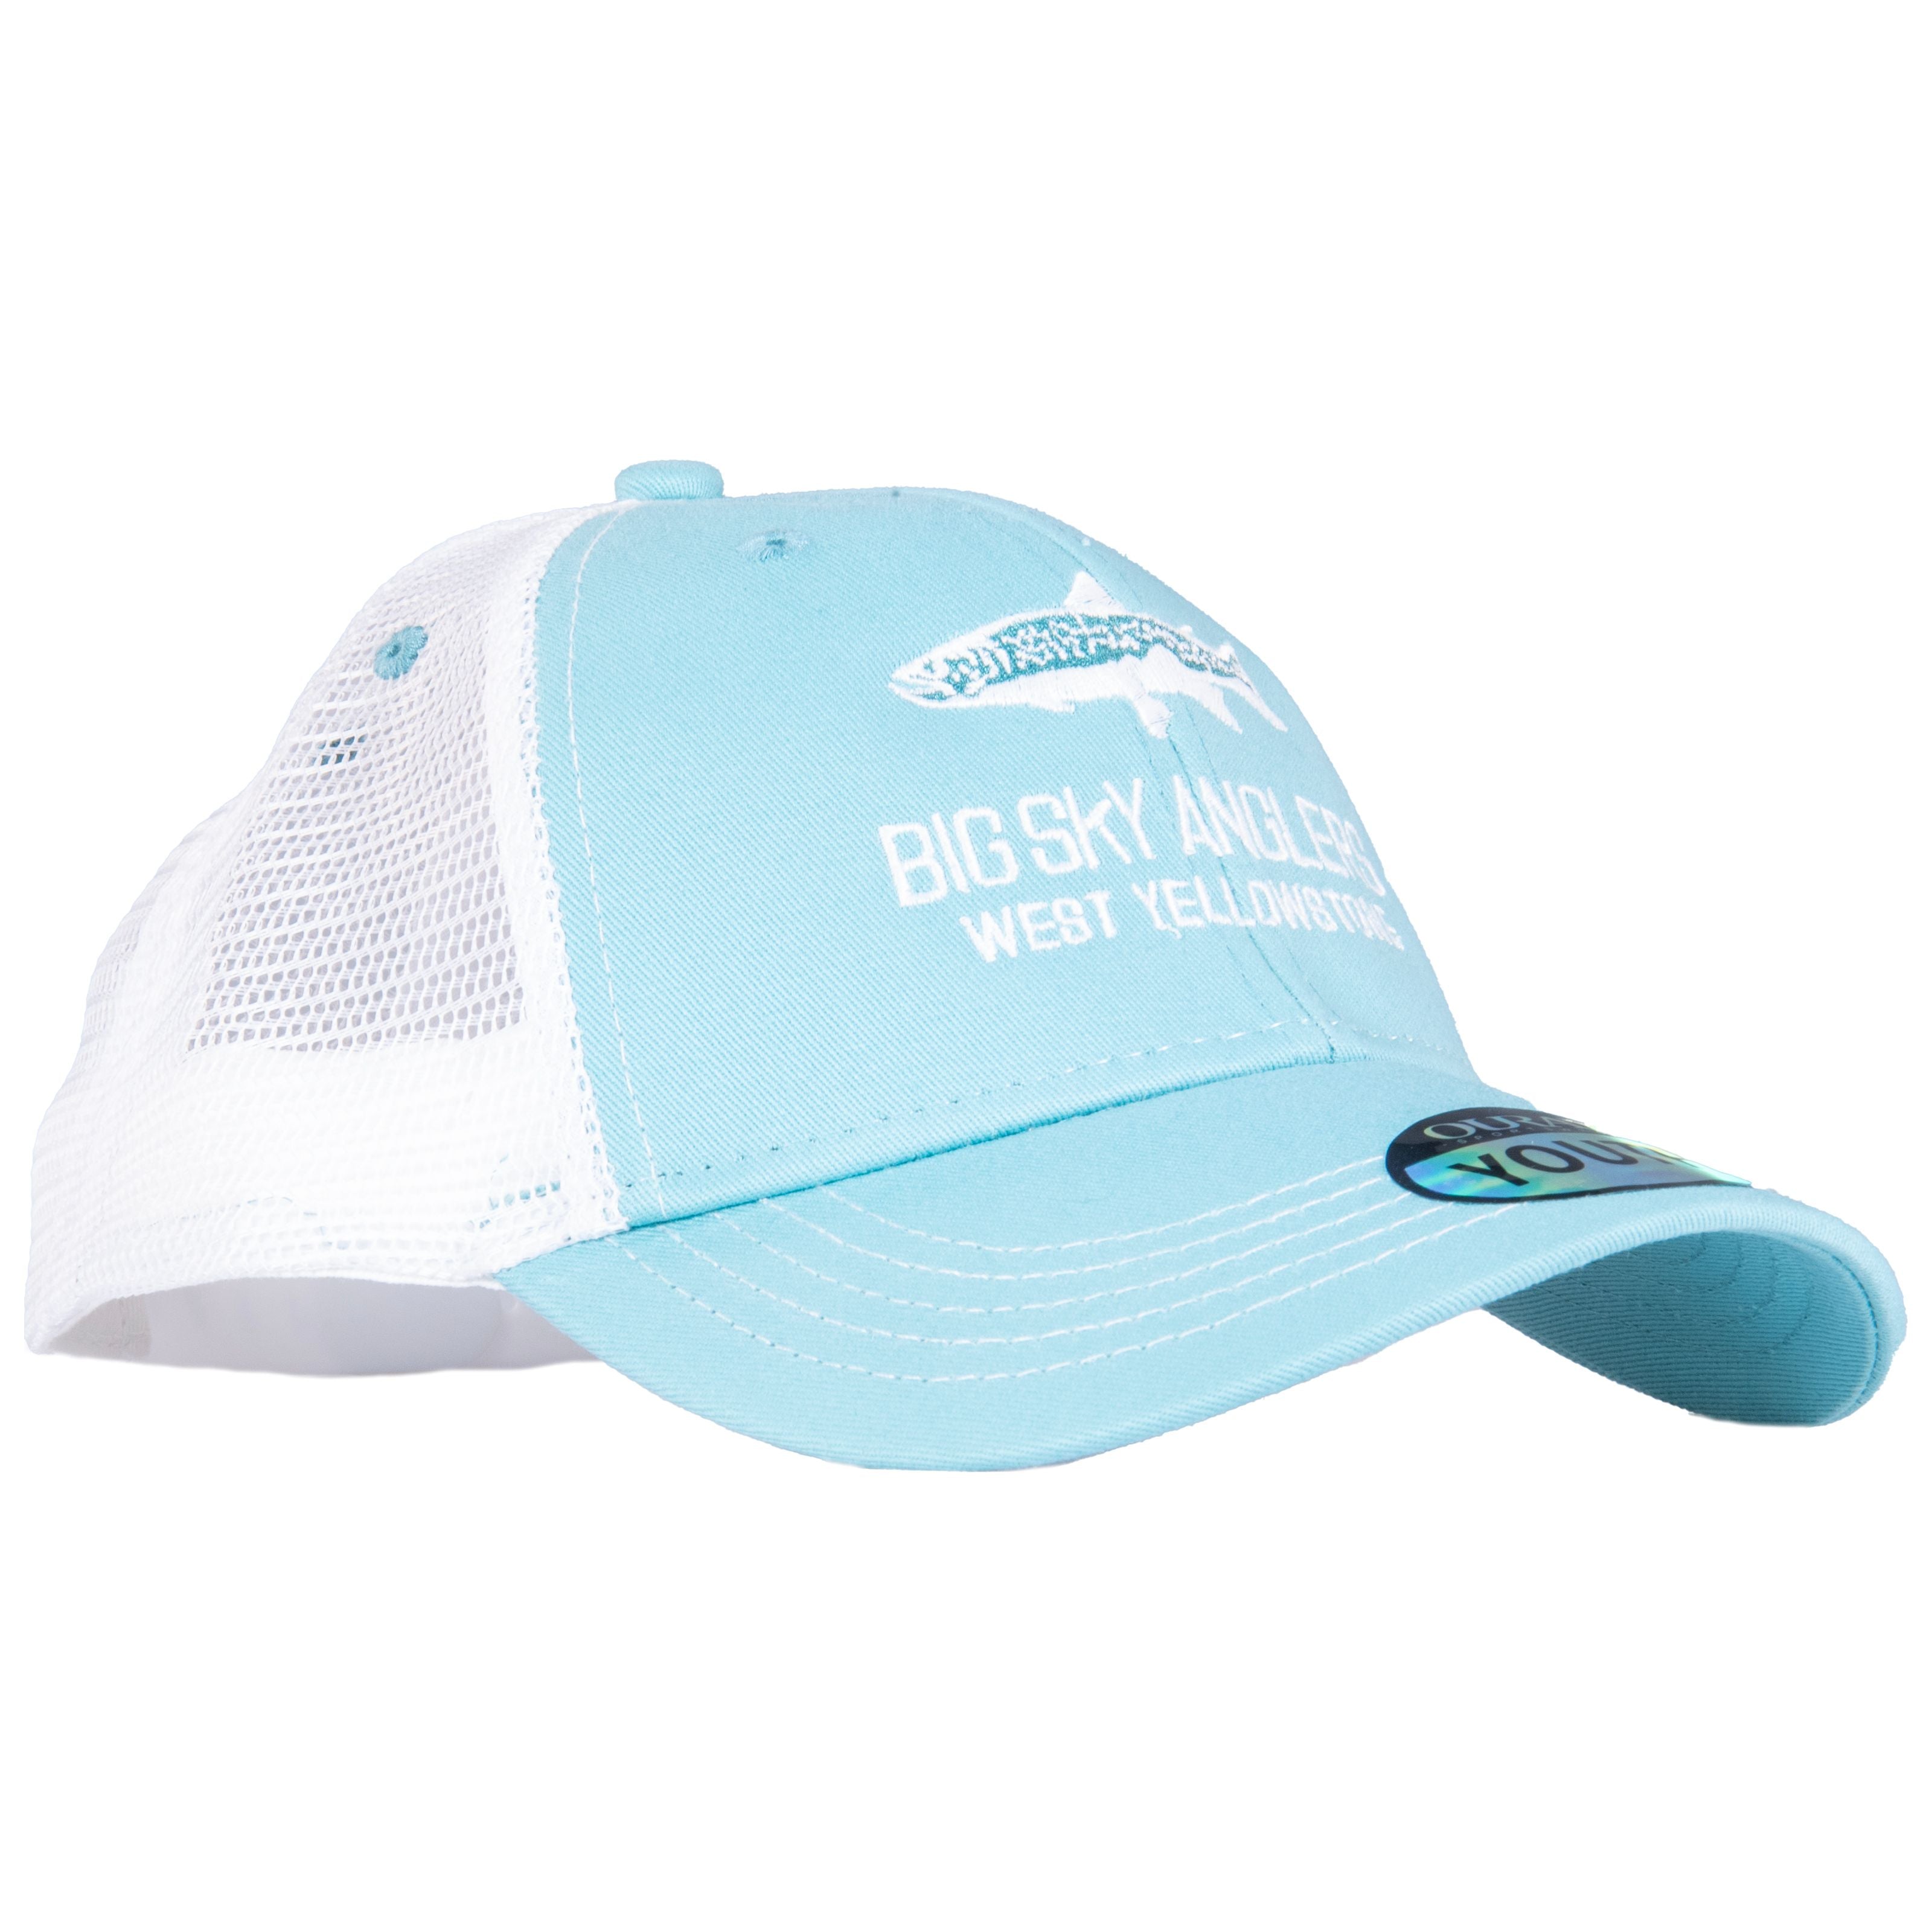 Big Sky Anglers Mountain Trout Logo Youth Sideline Cap - Turquoise Tonic/White Default Title Image 01